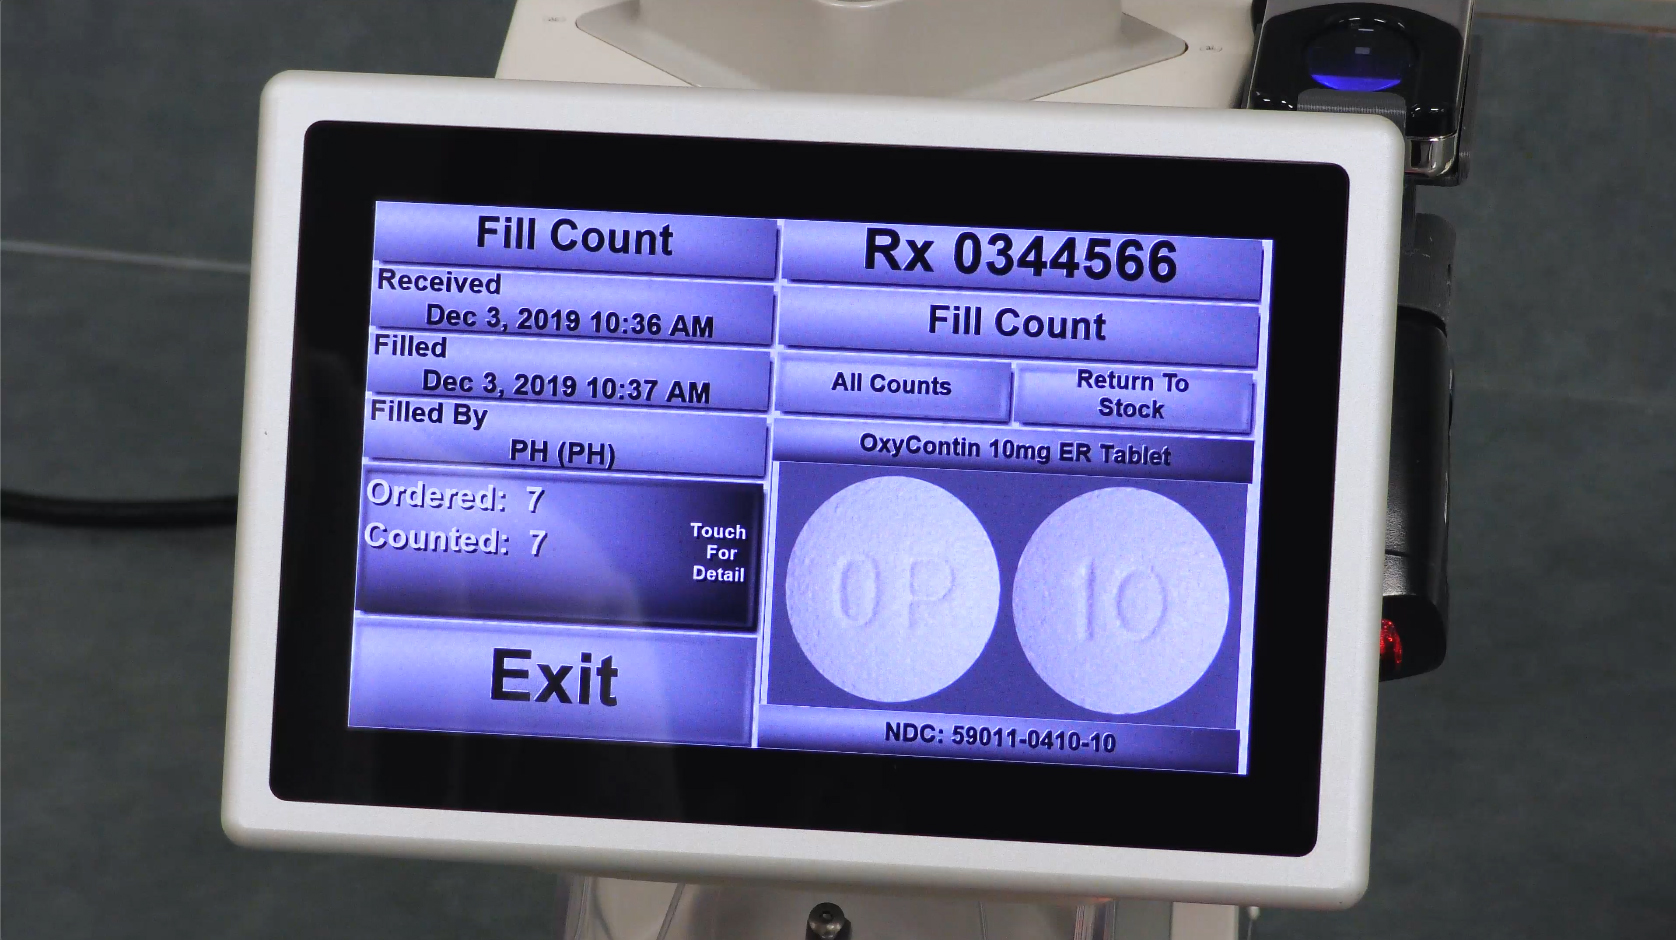 KL1Plus screen showing a record of a previously filled prescription